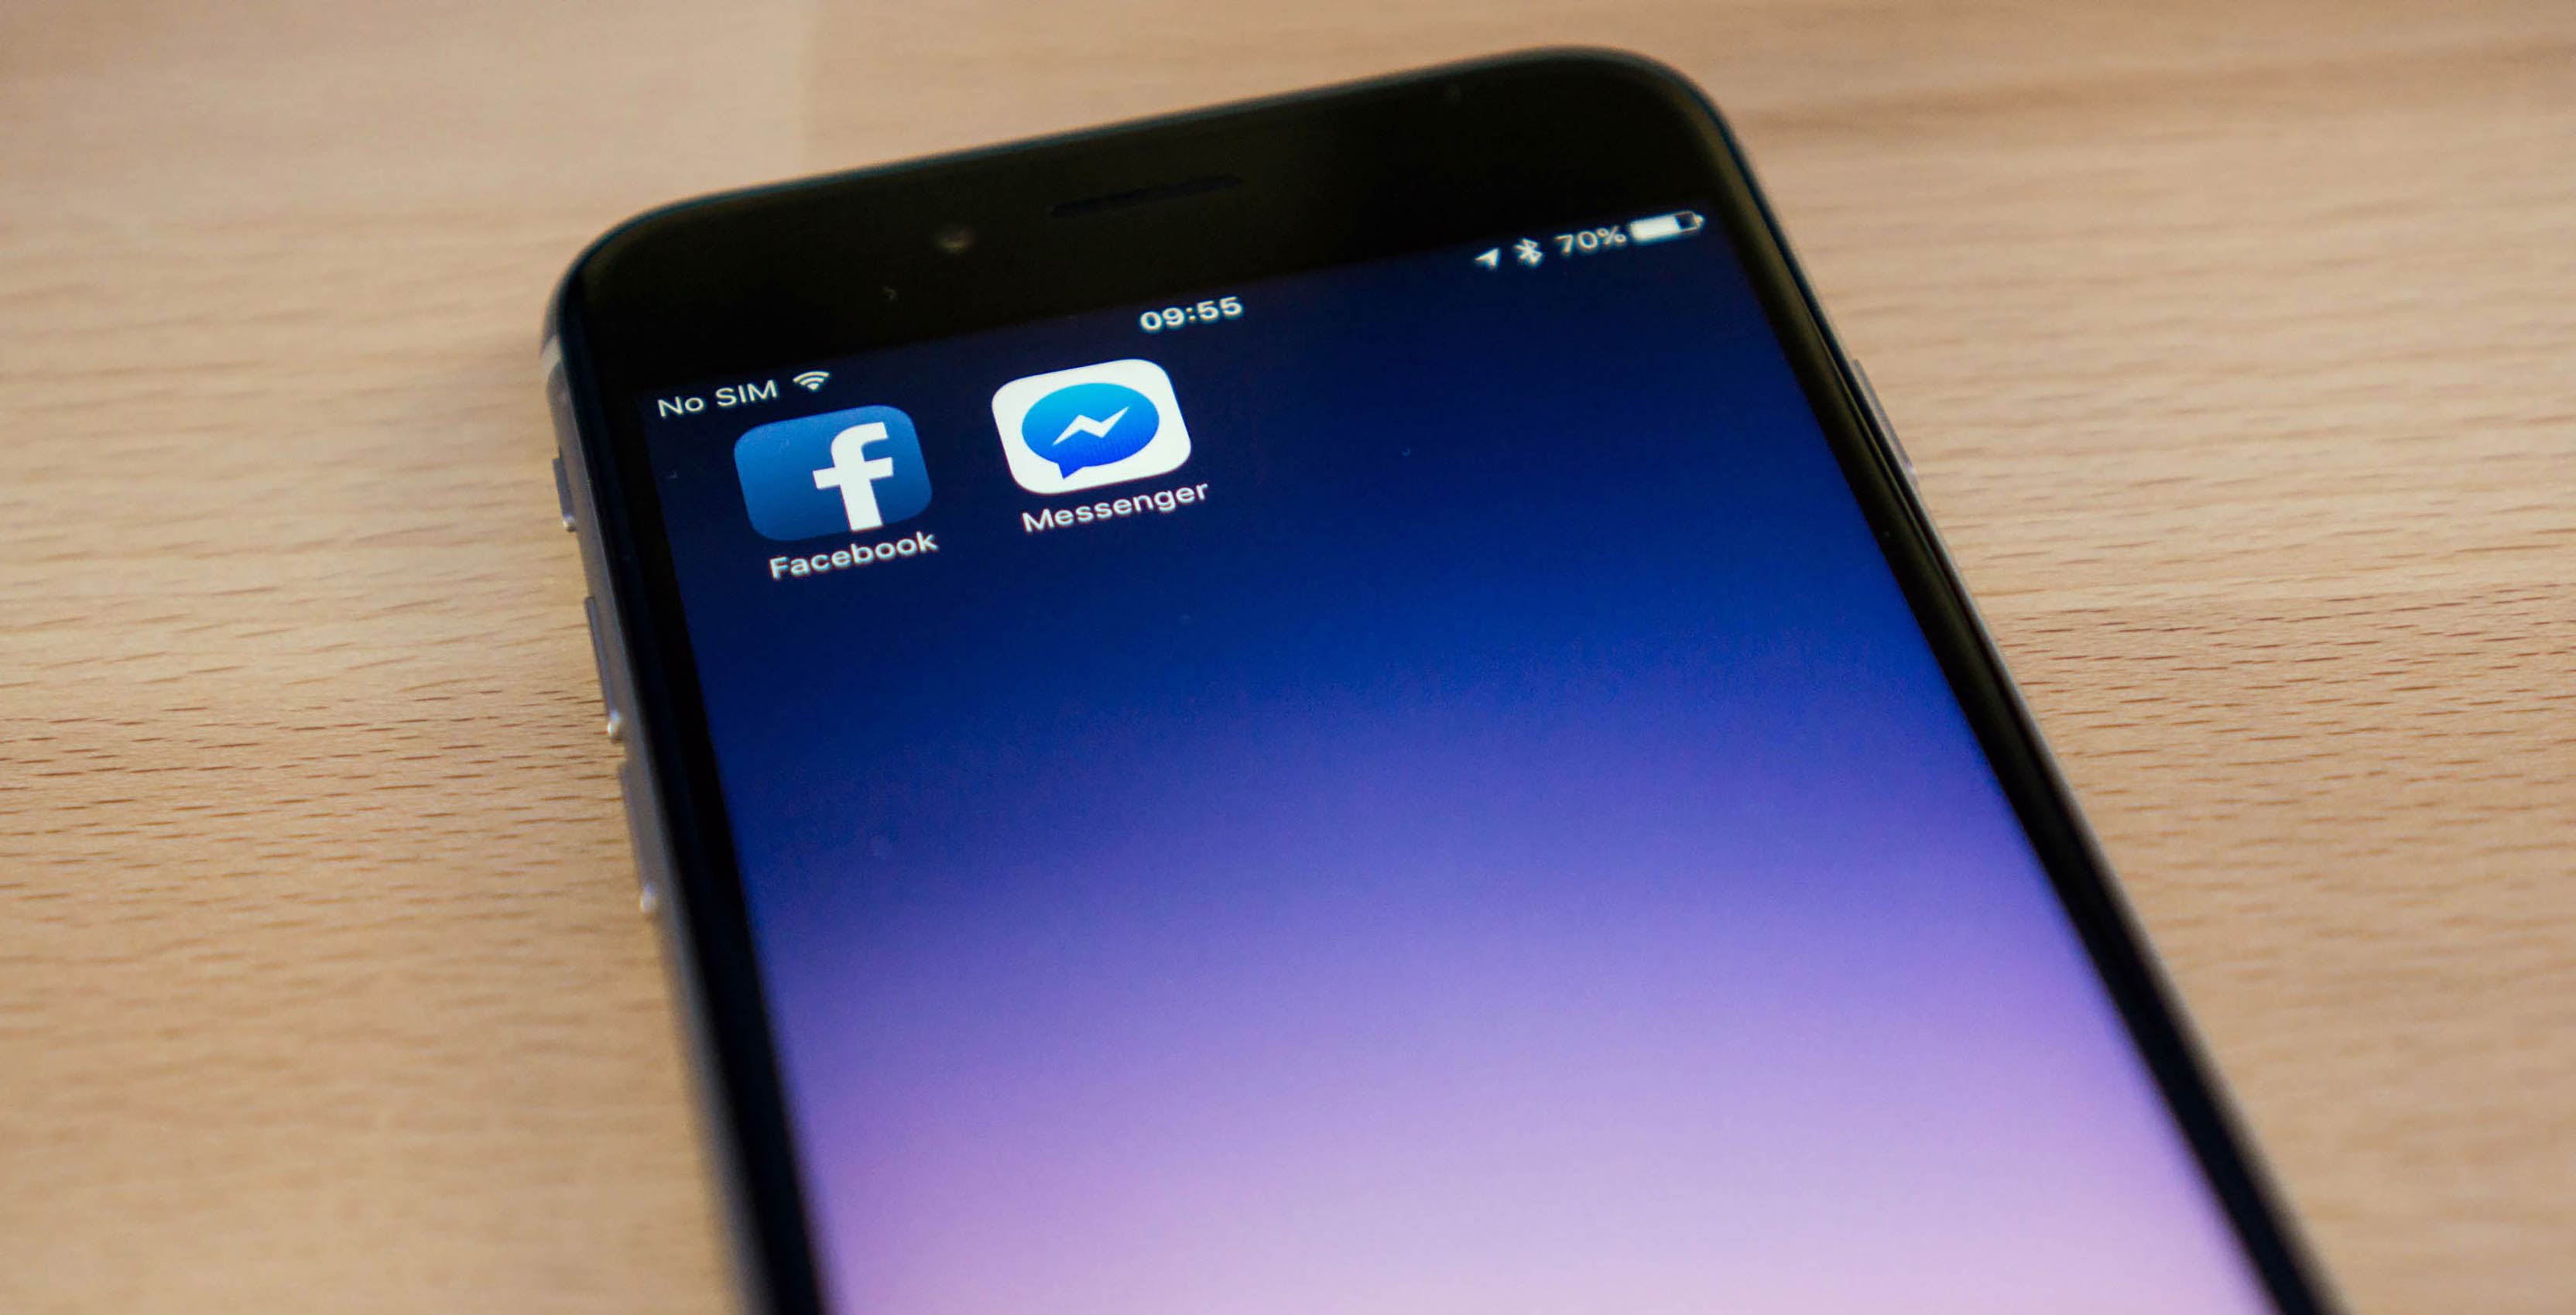 Facebook and Messenger app on iPhone